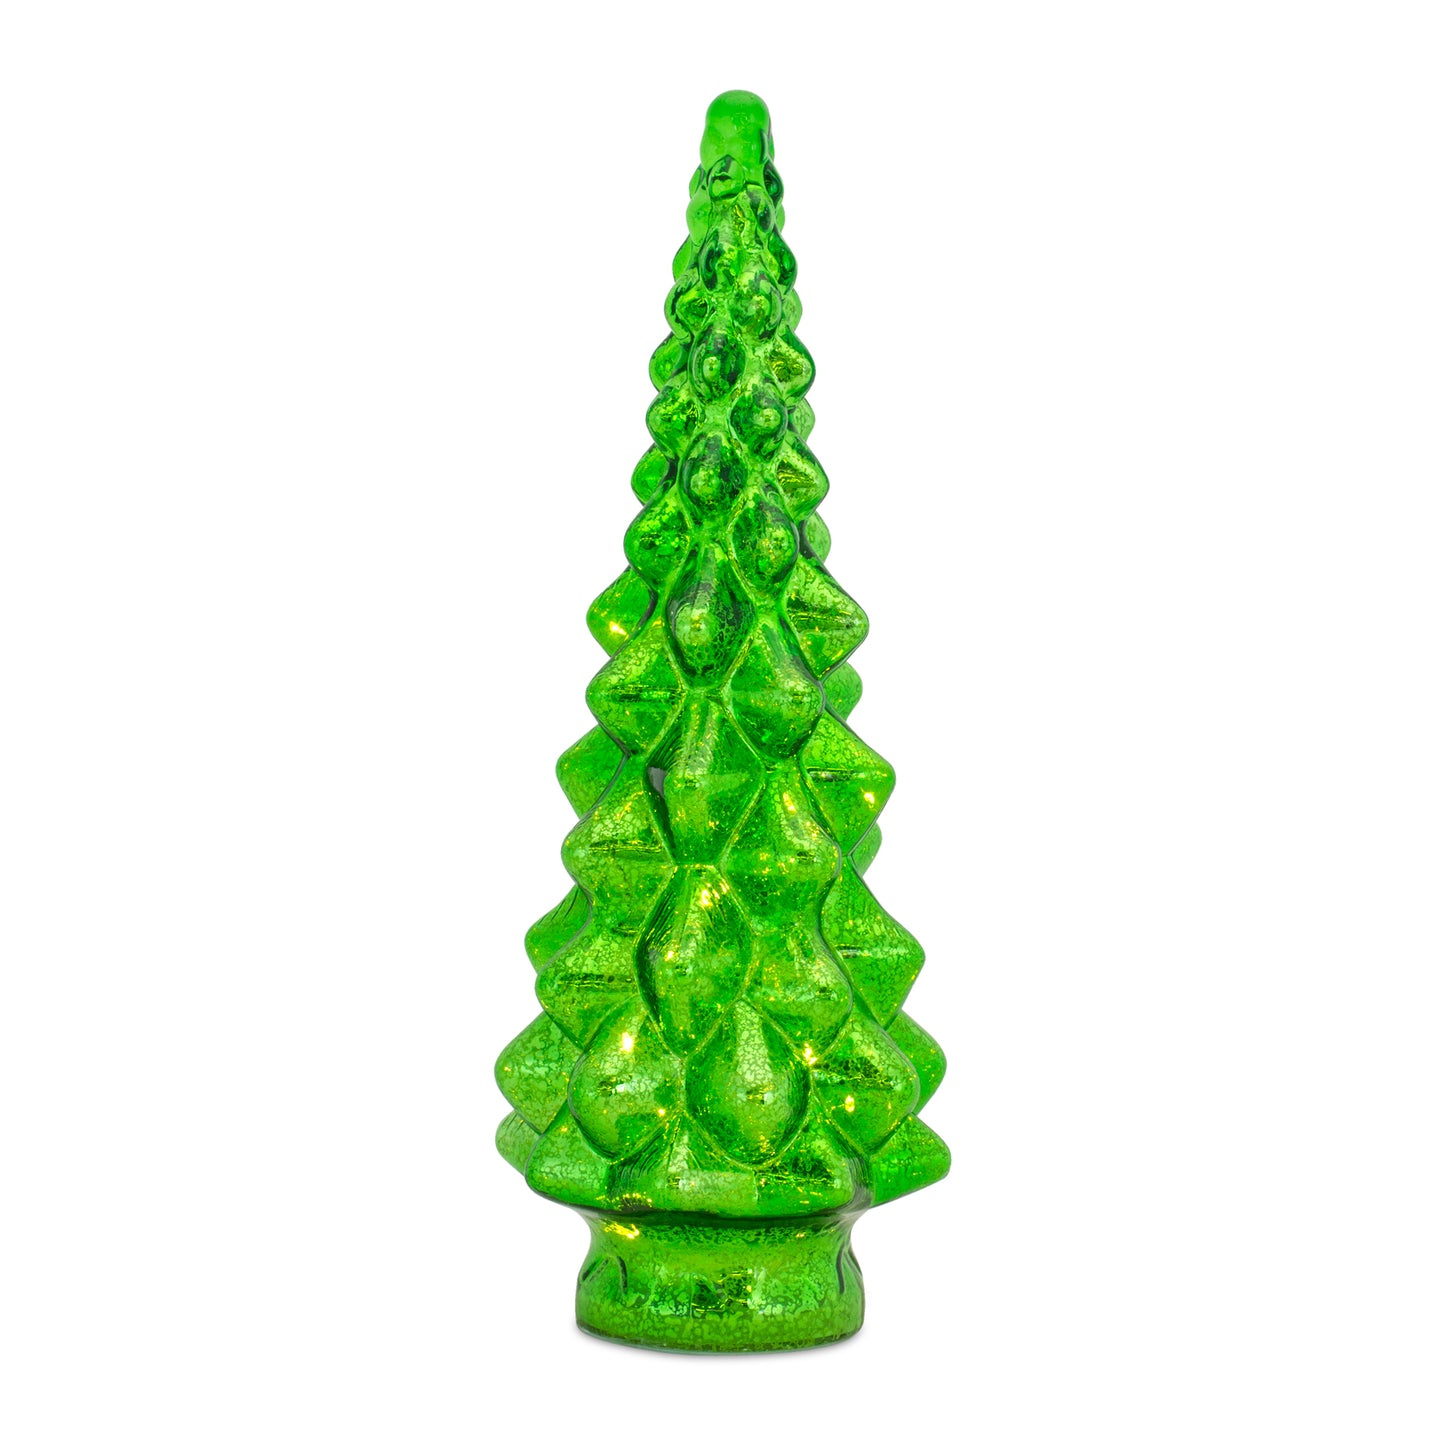 LED Glass Tree Choice of 10"H, 13.25"H, or 15.5"H